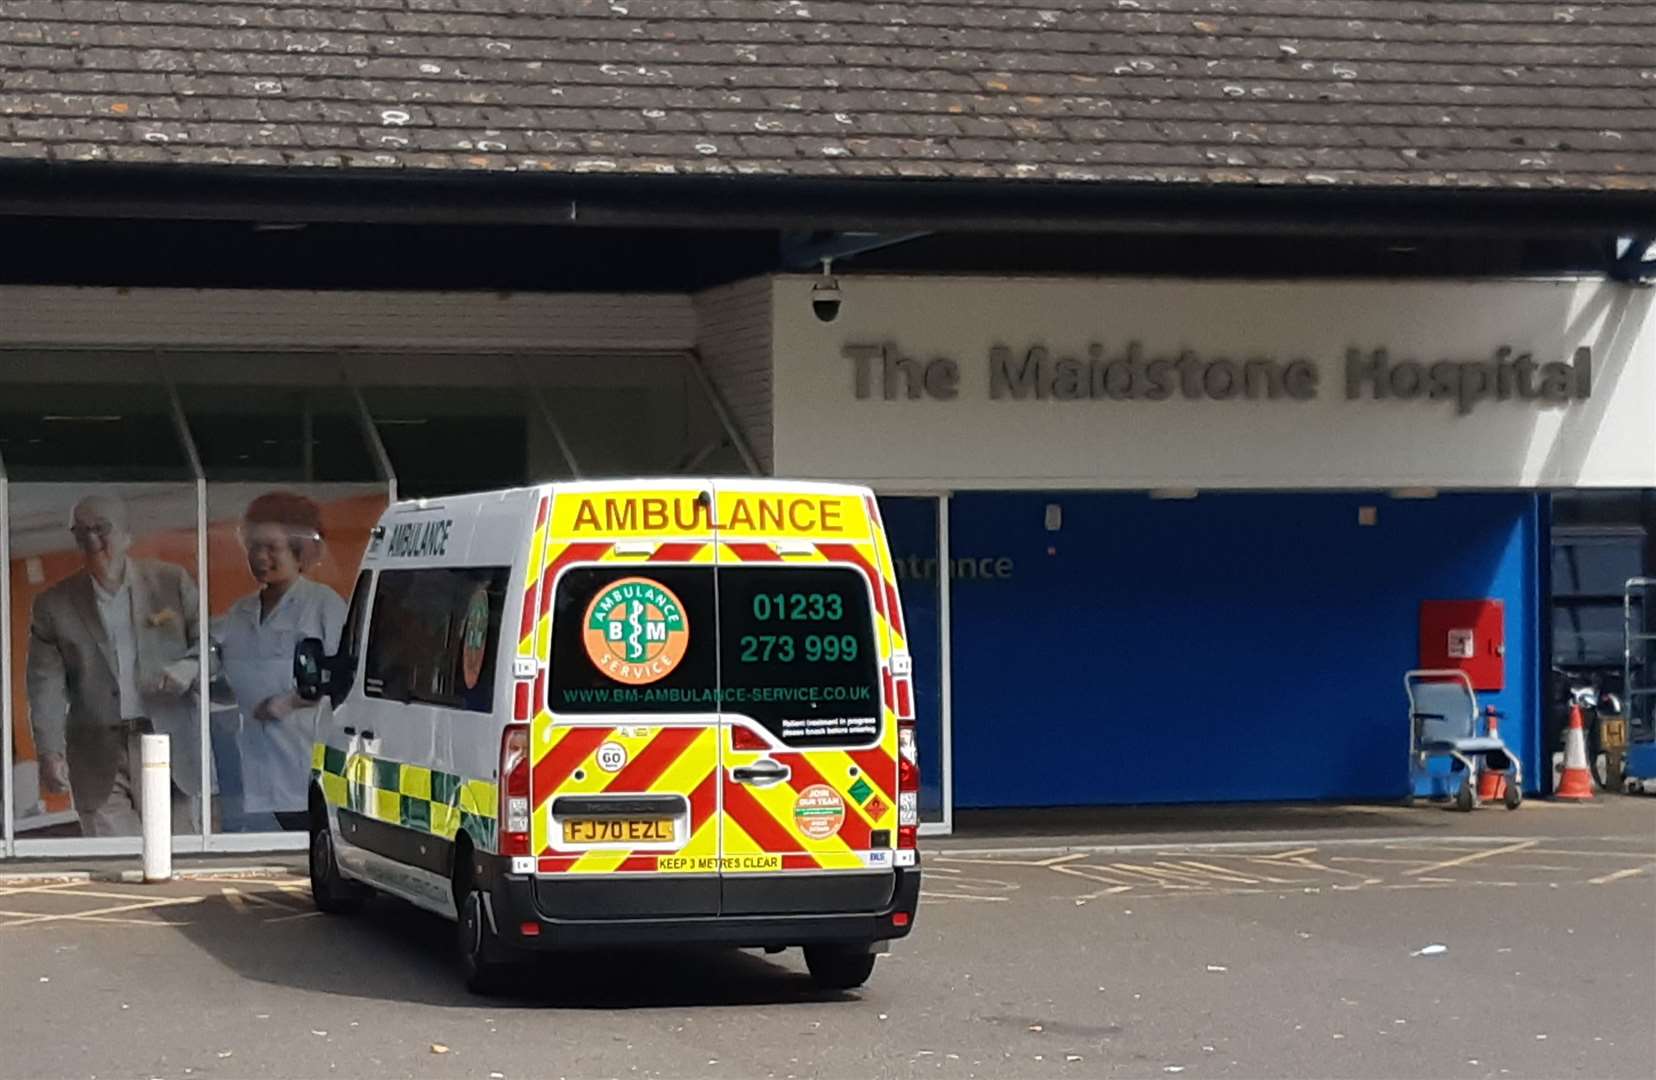 Mr Morris said he was forced to park between two ambulances at Maidstone Hospital